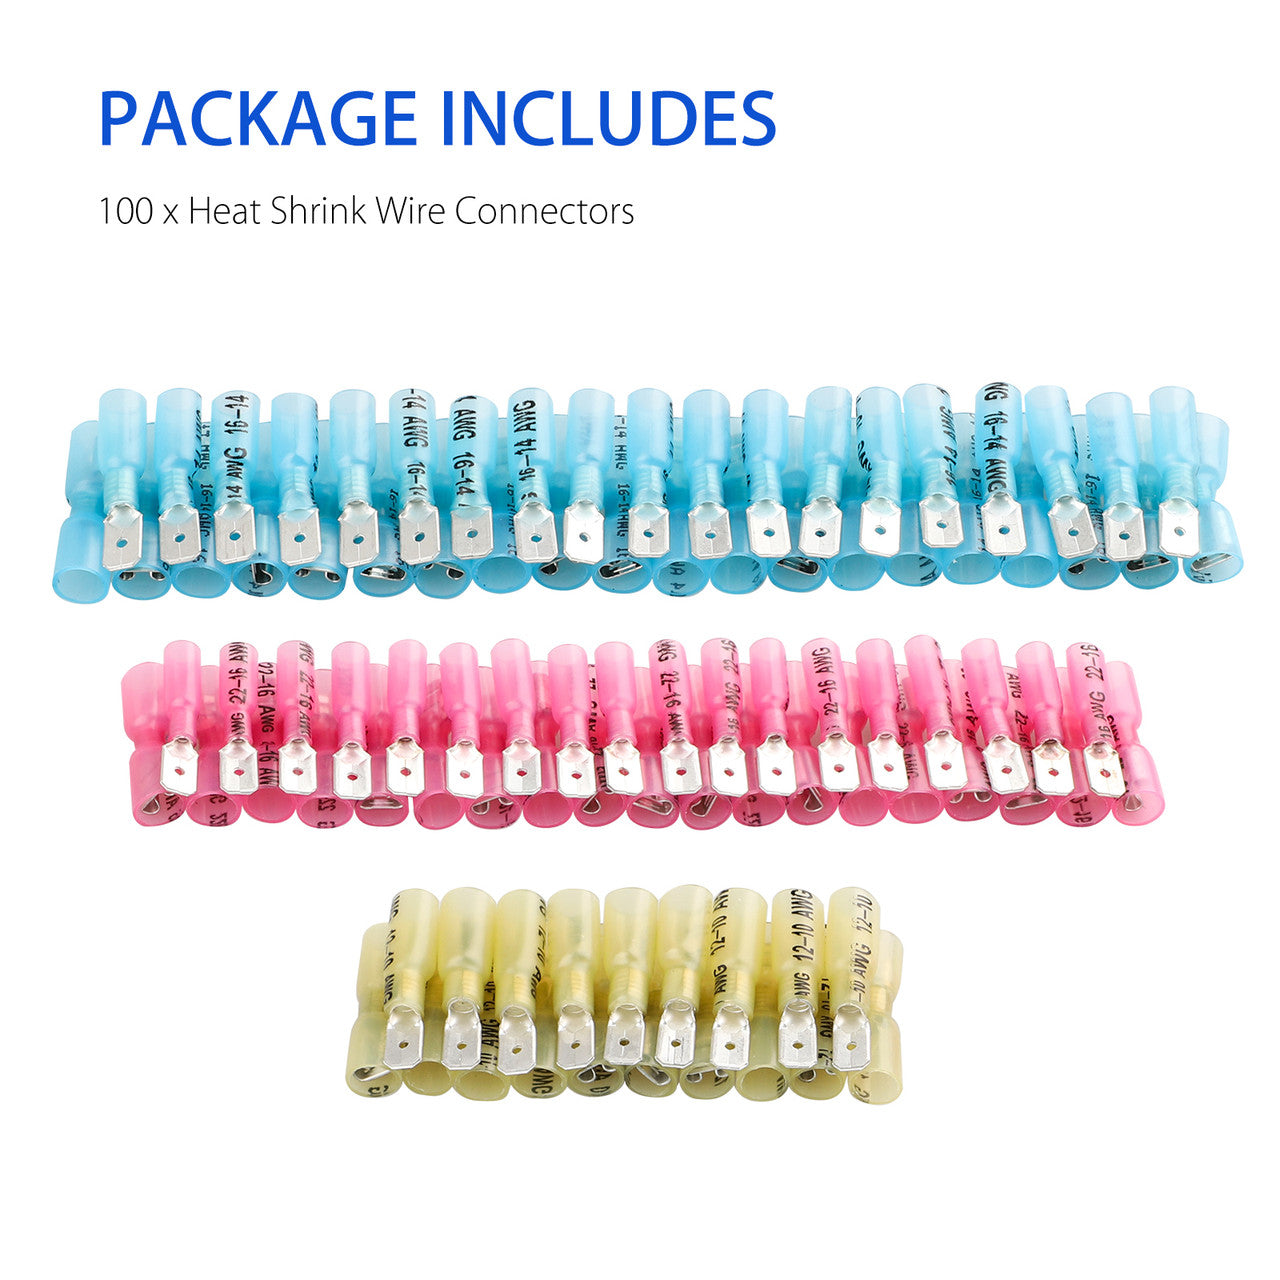 Solder Seal Wire Connectors, Heat Shrink Butt Connector Waterproof Insulated Electrical Butt Terminals Wire Splice for Automotive Marine Automotive Outdoor, 100PCS